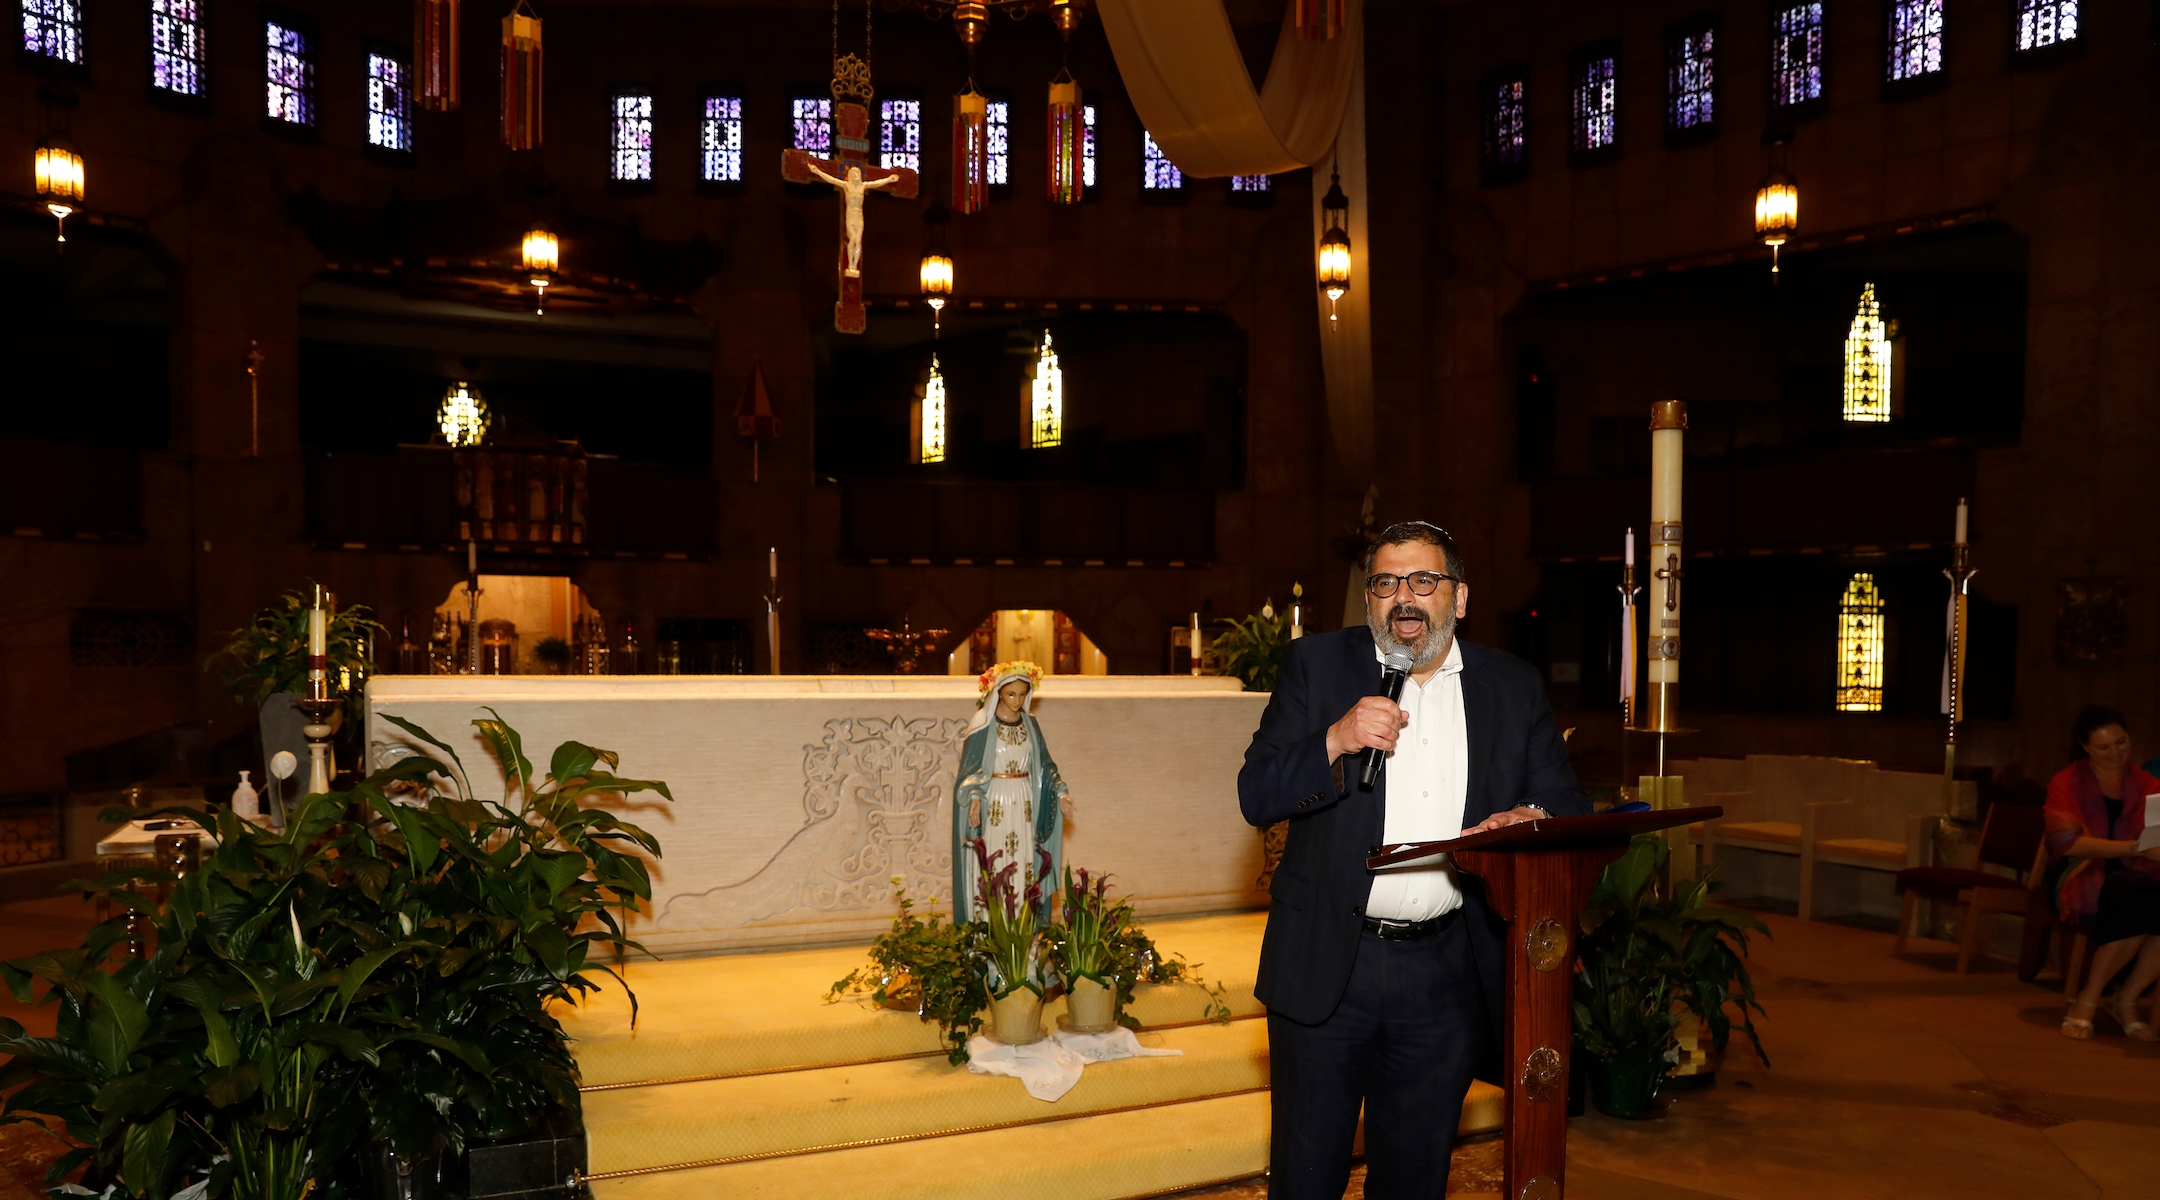 Rabbi Asher Lopatin, executive director of the Detroit JCRC/AJC, speaks from the old dais of Father Charles Coughlin at the National Shrine of the Little Flower Catholic church in Royal Oak, Mich., May 31, 2022. Lopatin had helped organize an event at the church discussing “the Jewish-Catholic Relationship.” Shrine’s founder, Father Coughlin, broadcasted an antisemitic radio show during the Great Depression. (Jeff Kowalsky)